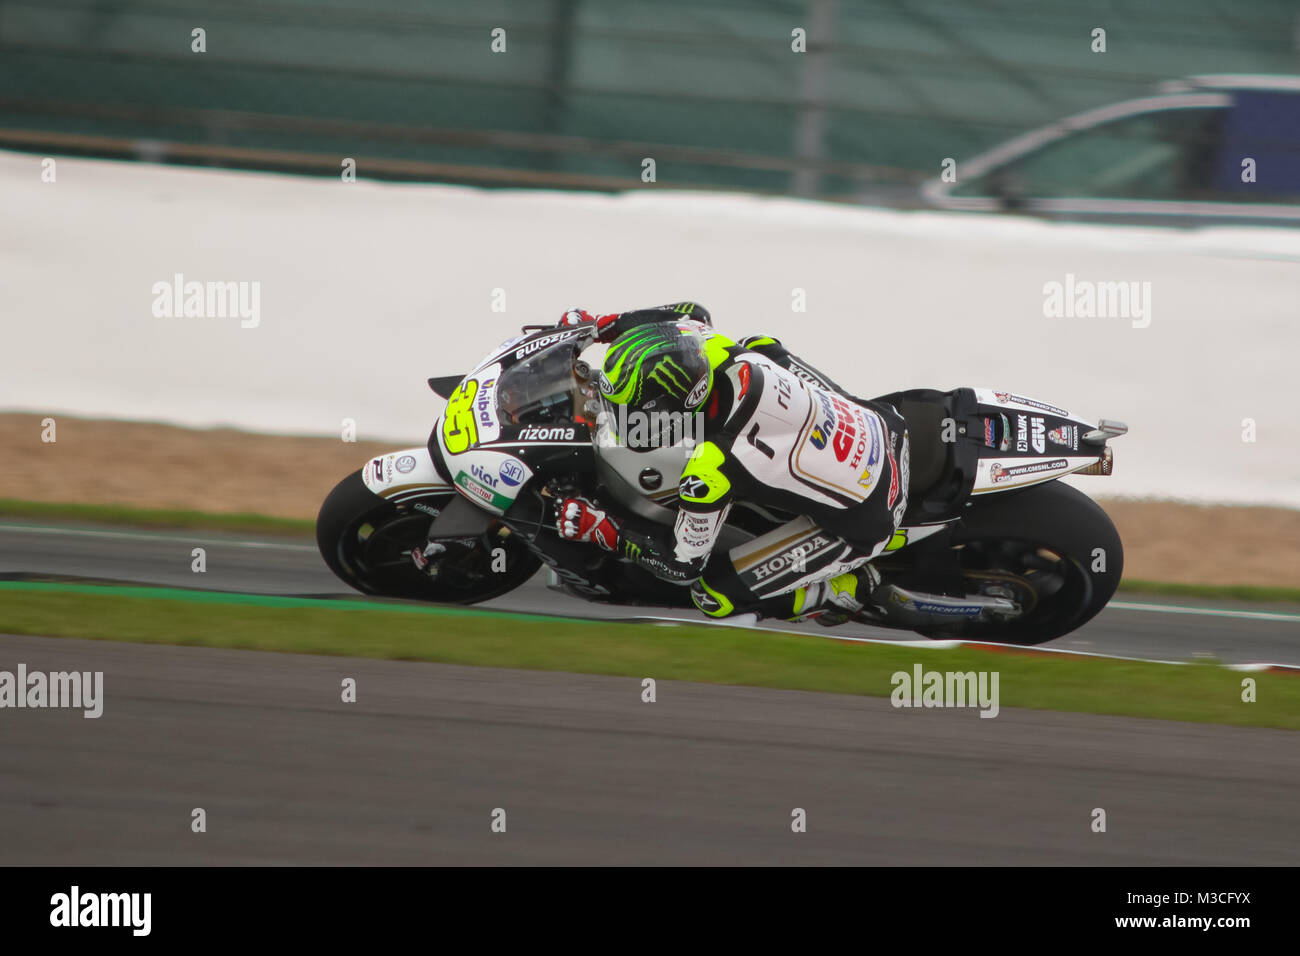 Cal Crutchlow on the way to setting a quick time in qualifying at the MotoGP British Grand Prix 2016 Stock Photo